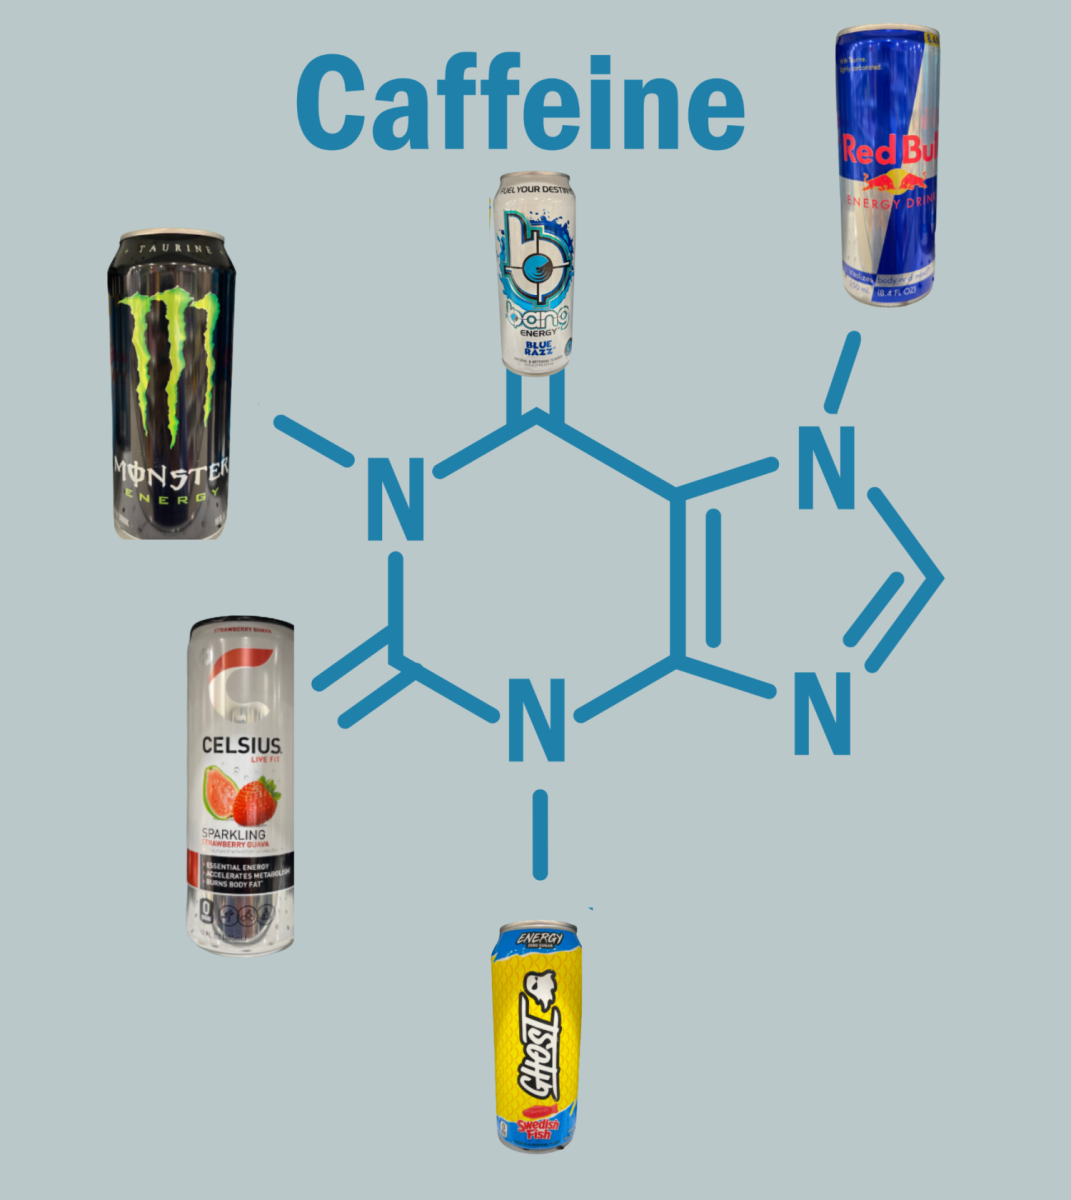 High+students+have+started+using+a+different+way+to+get+energy+throughout+the+day%3A+Energy+Drinks.+Where+there+is+far+more+caffeine+than+your+average+cup+of+coffee.